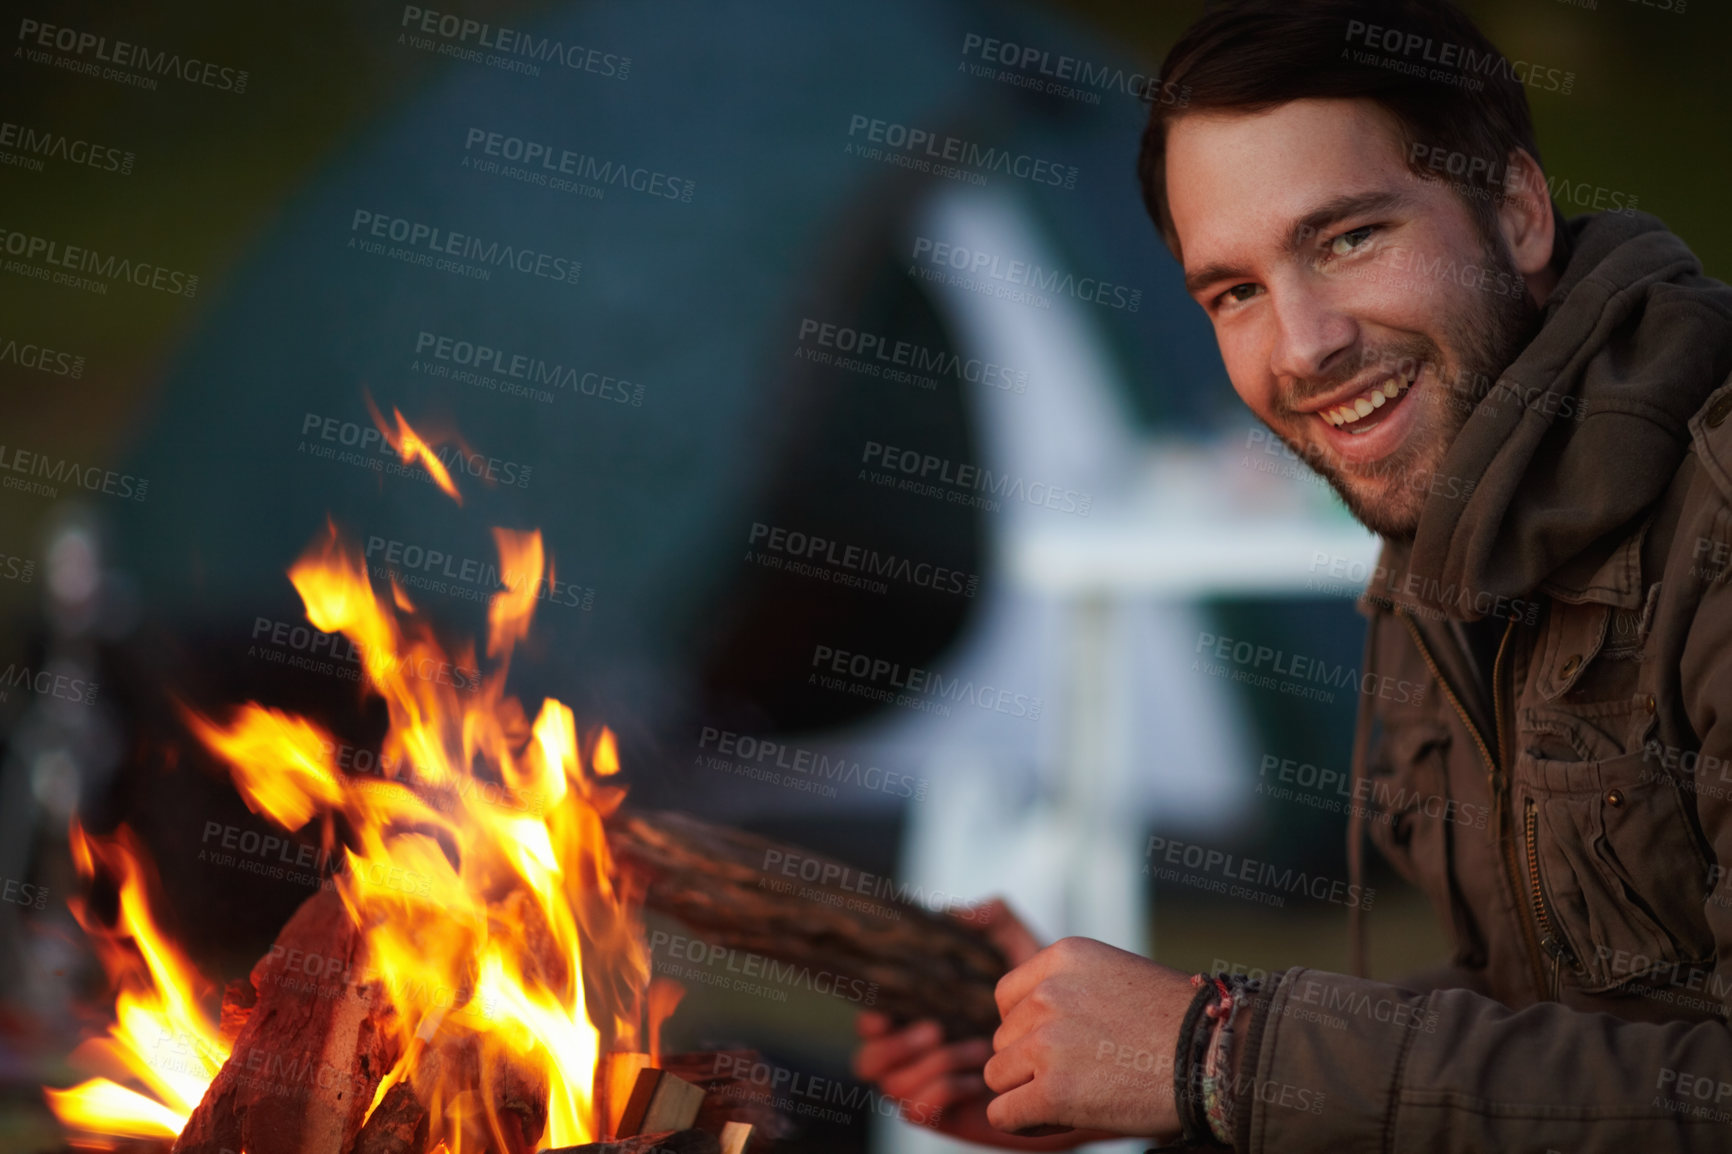 Buy stock photo Happy man, campfire and camping, travel and outdoor in nature, warm up and winter, relax with peace and vacation. Camper, flame or fire for heat and freedom, campsite adventure with wood and comfort